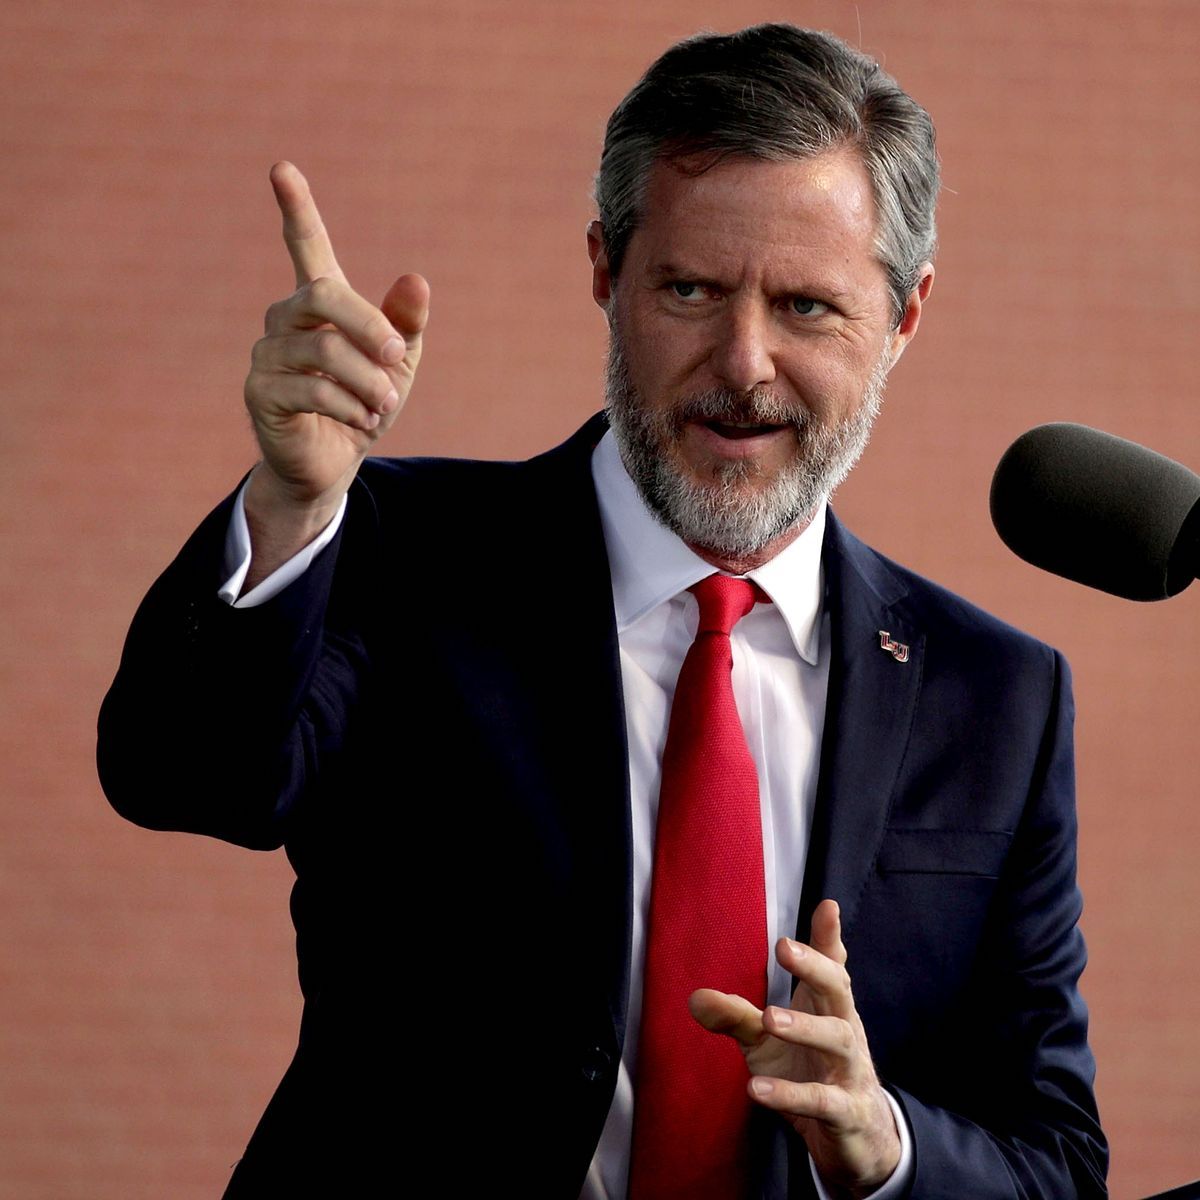 Former Liberty University President Jerry Falwell Jr. officially resigned as a result of an alleged sex scandal. Here's what we know.